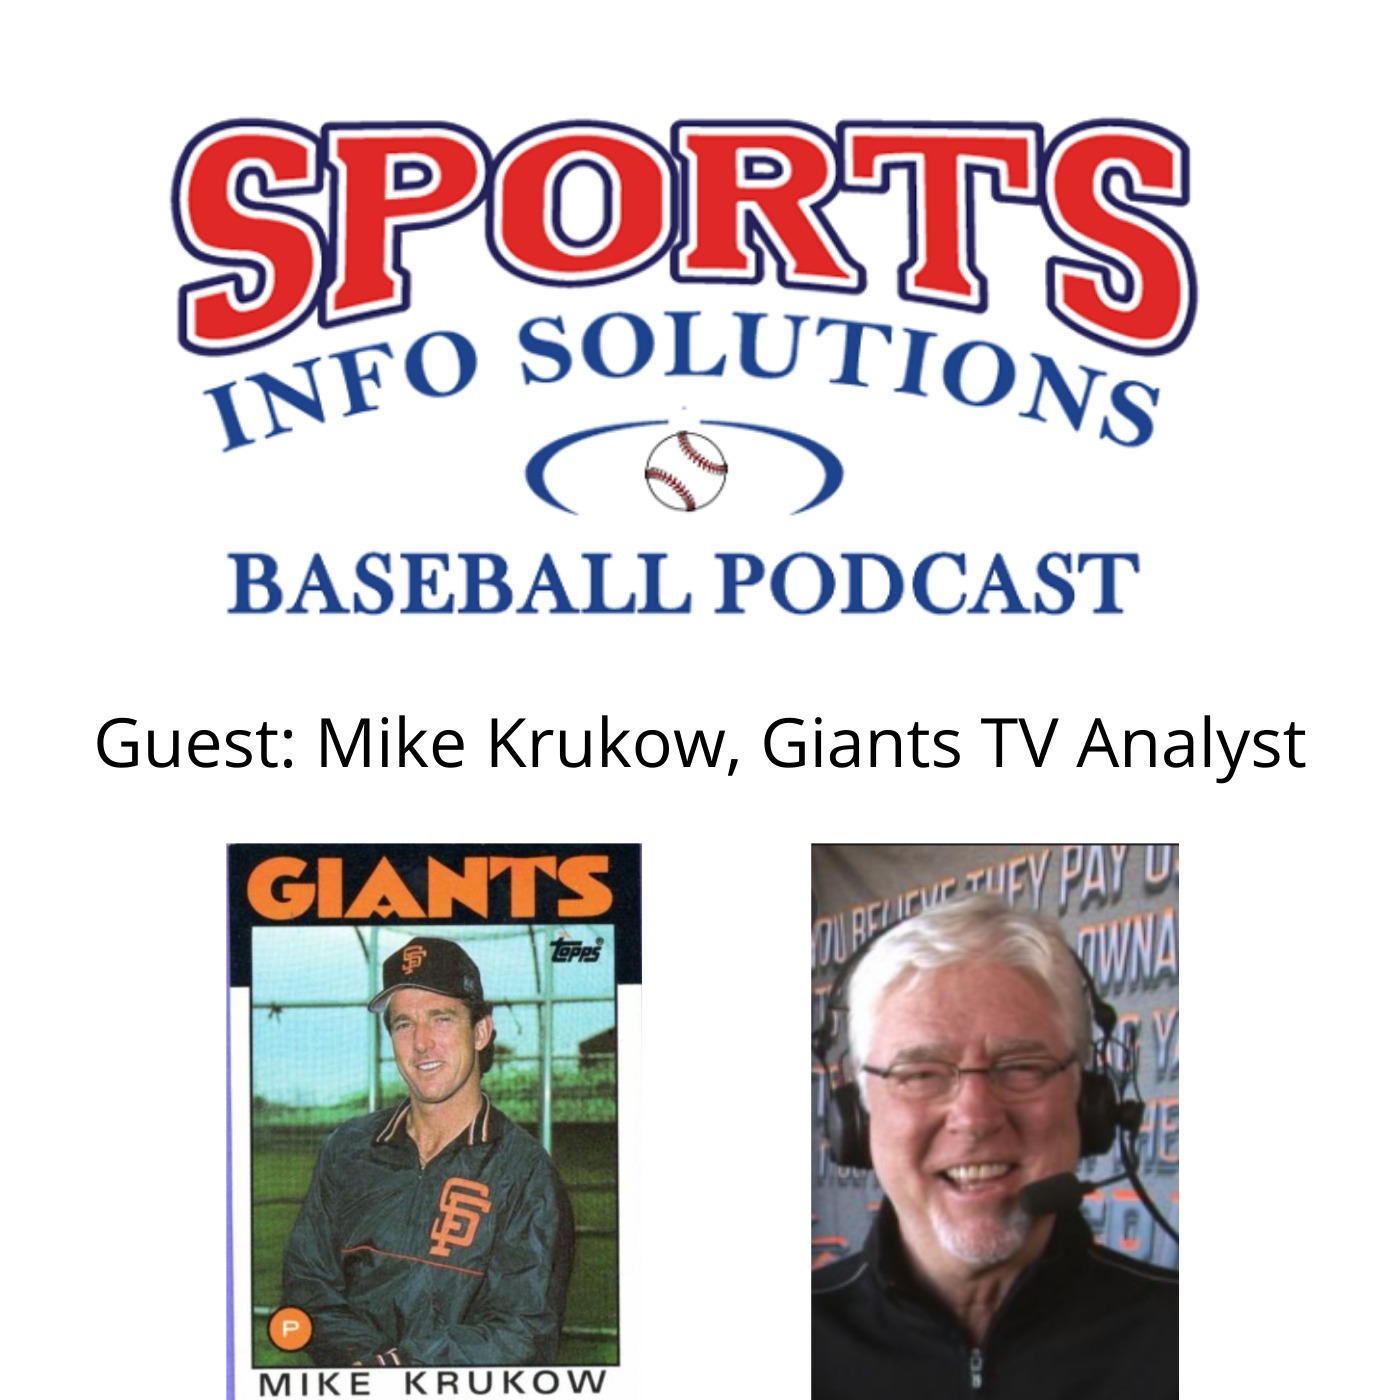 Mike Krukow on the Giants’ As a Model for Fixing Pitchers, Standout Defense